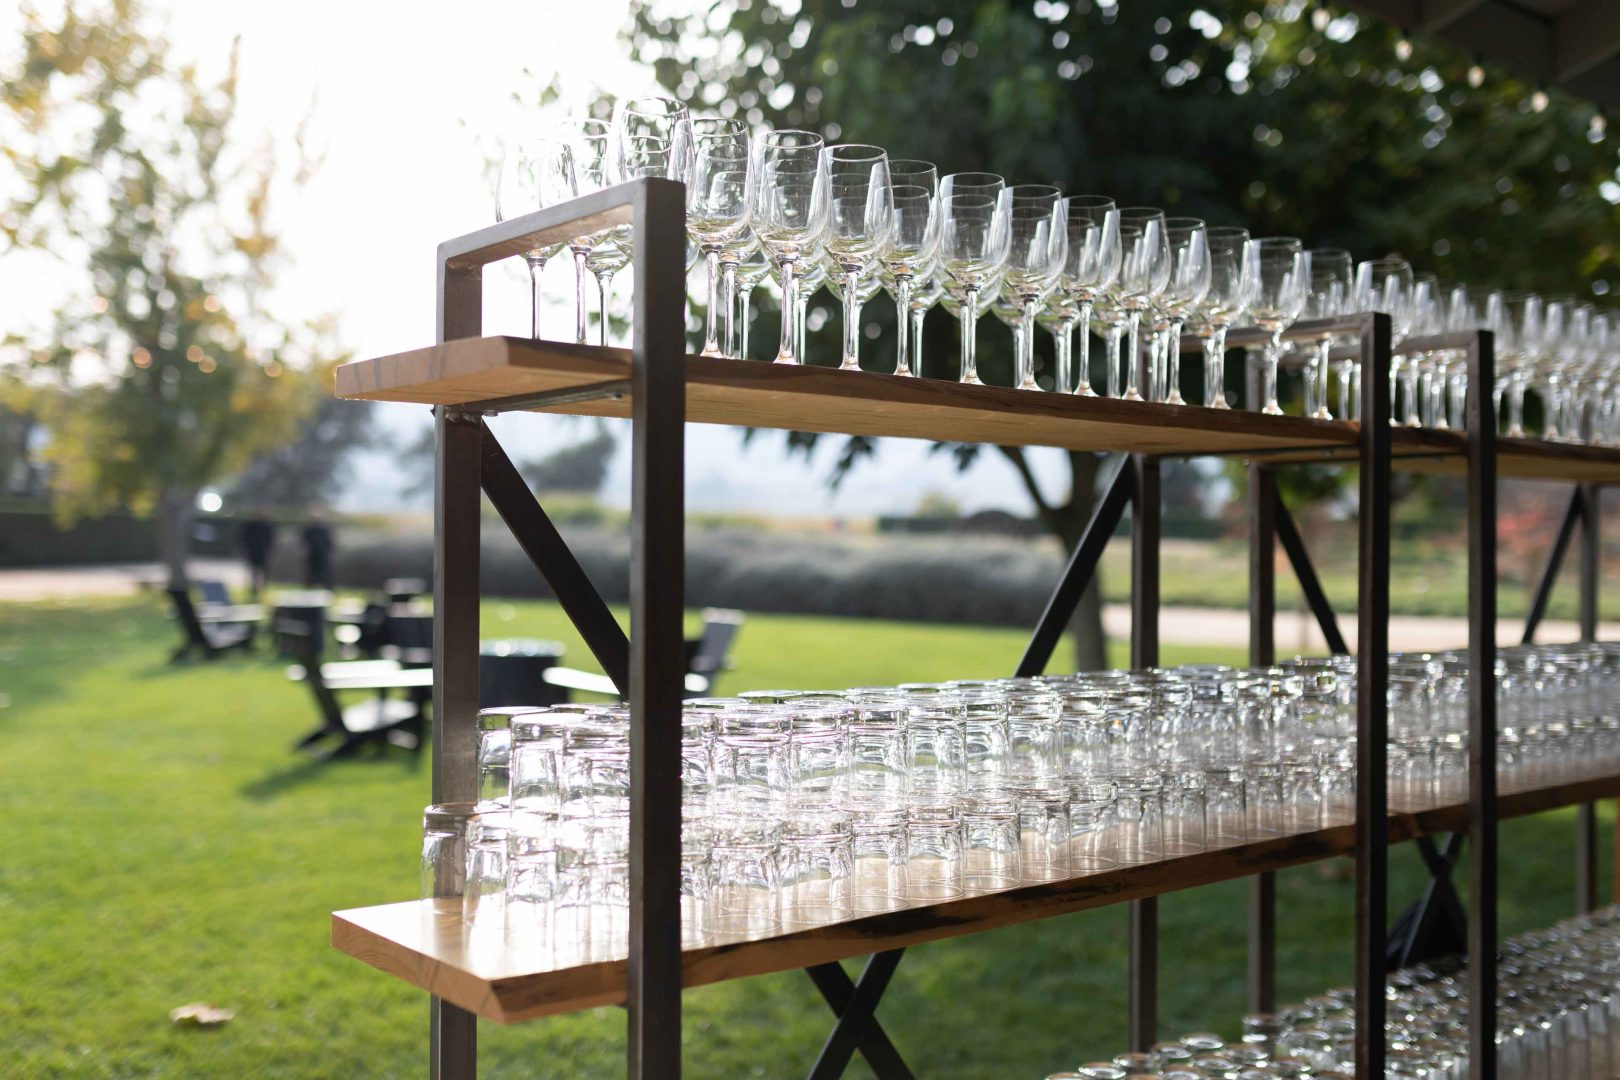 Stacks of glasses ready for use at outside Folktable catering event